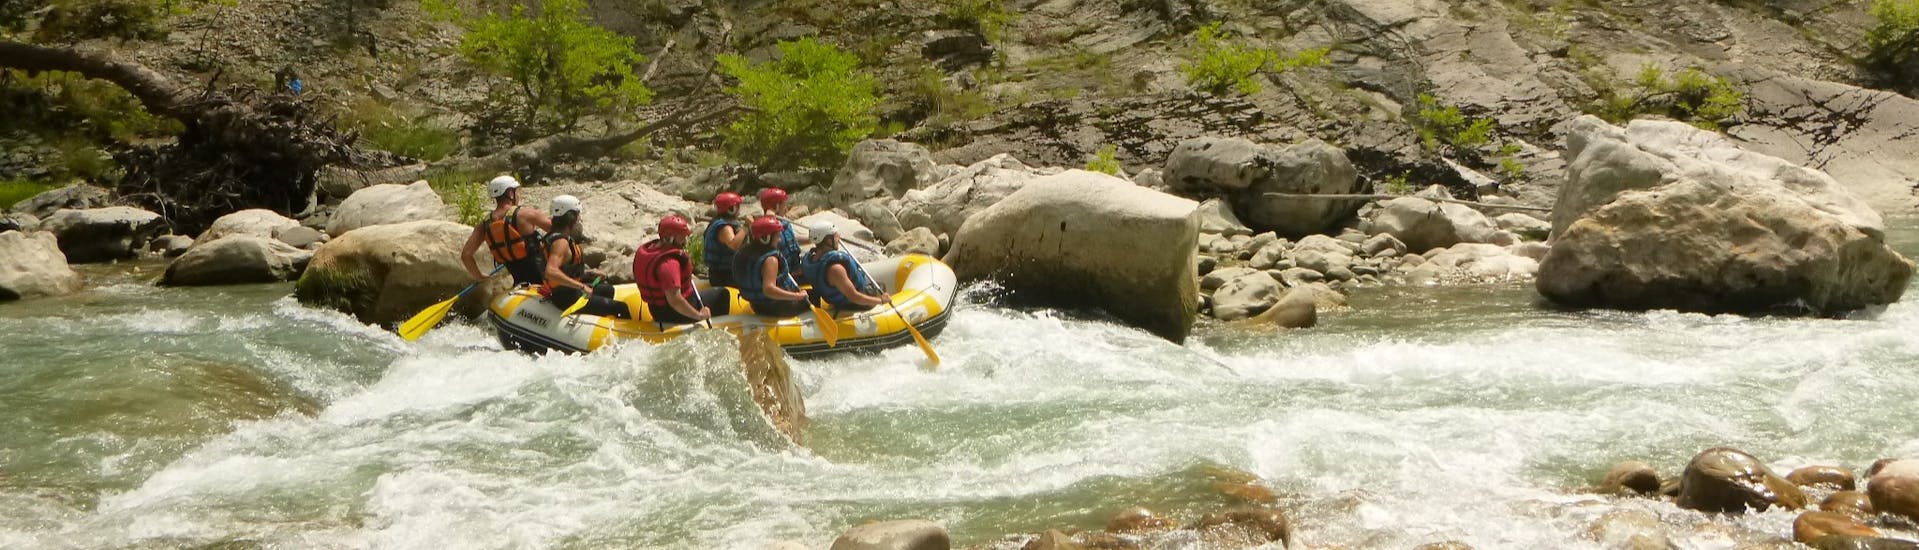 People on raft on the Aracthos river during Rafting on the Arachthos River near Loannina by Active Nature Epirus.